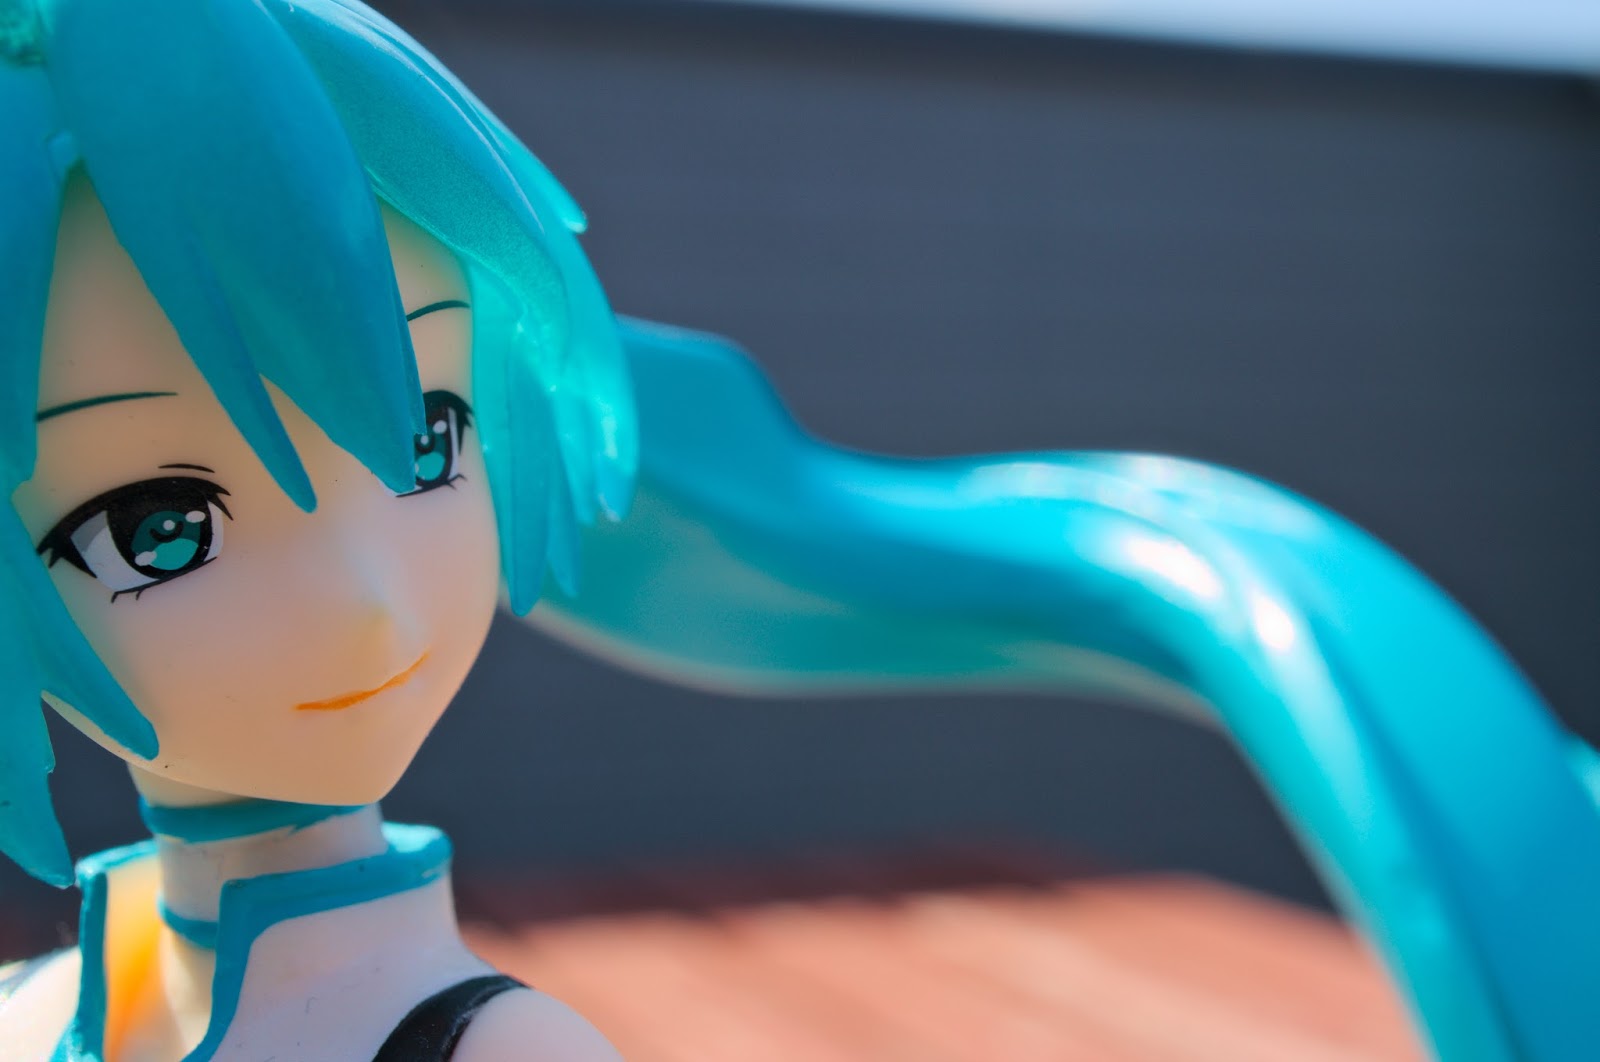 Addicted to FIGURES: プライズレビューVOCALOID レーシングミク